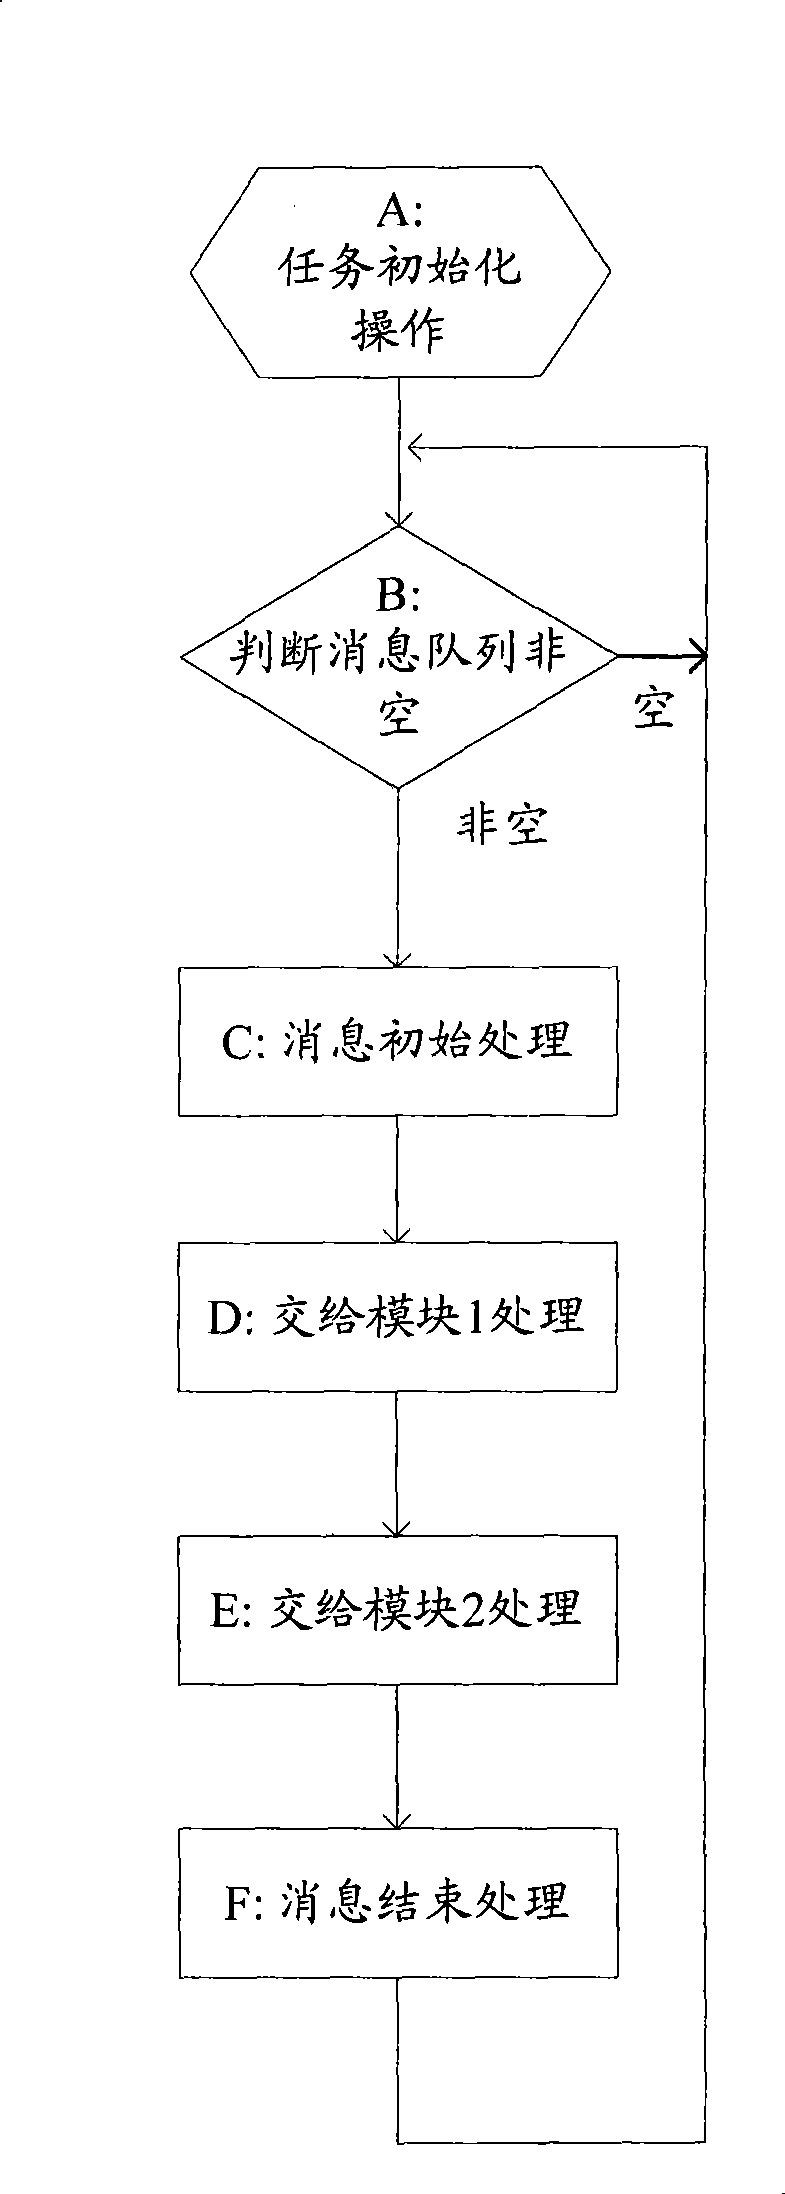 Method and apparatus for providing positioning information for task endless loop